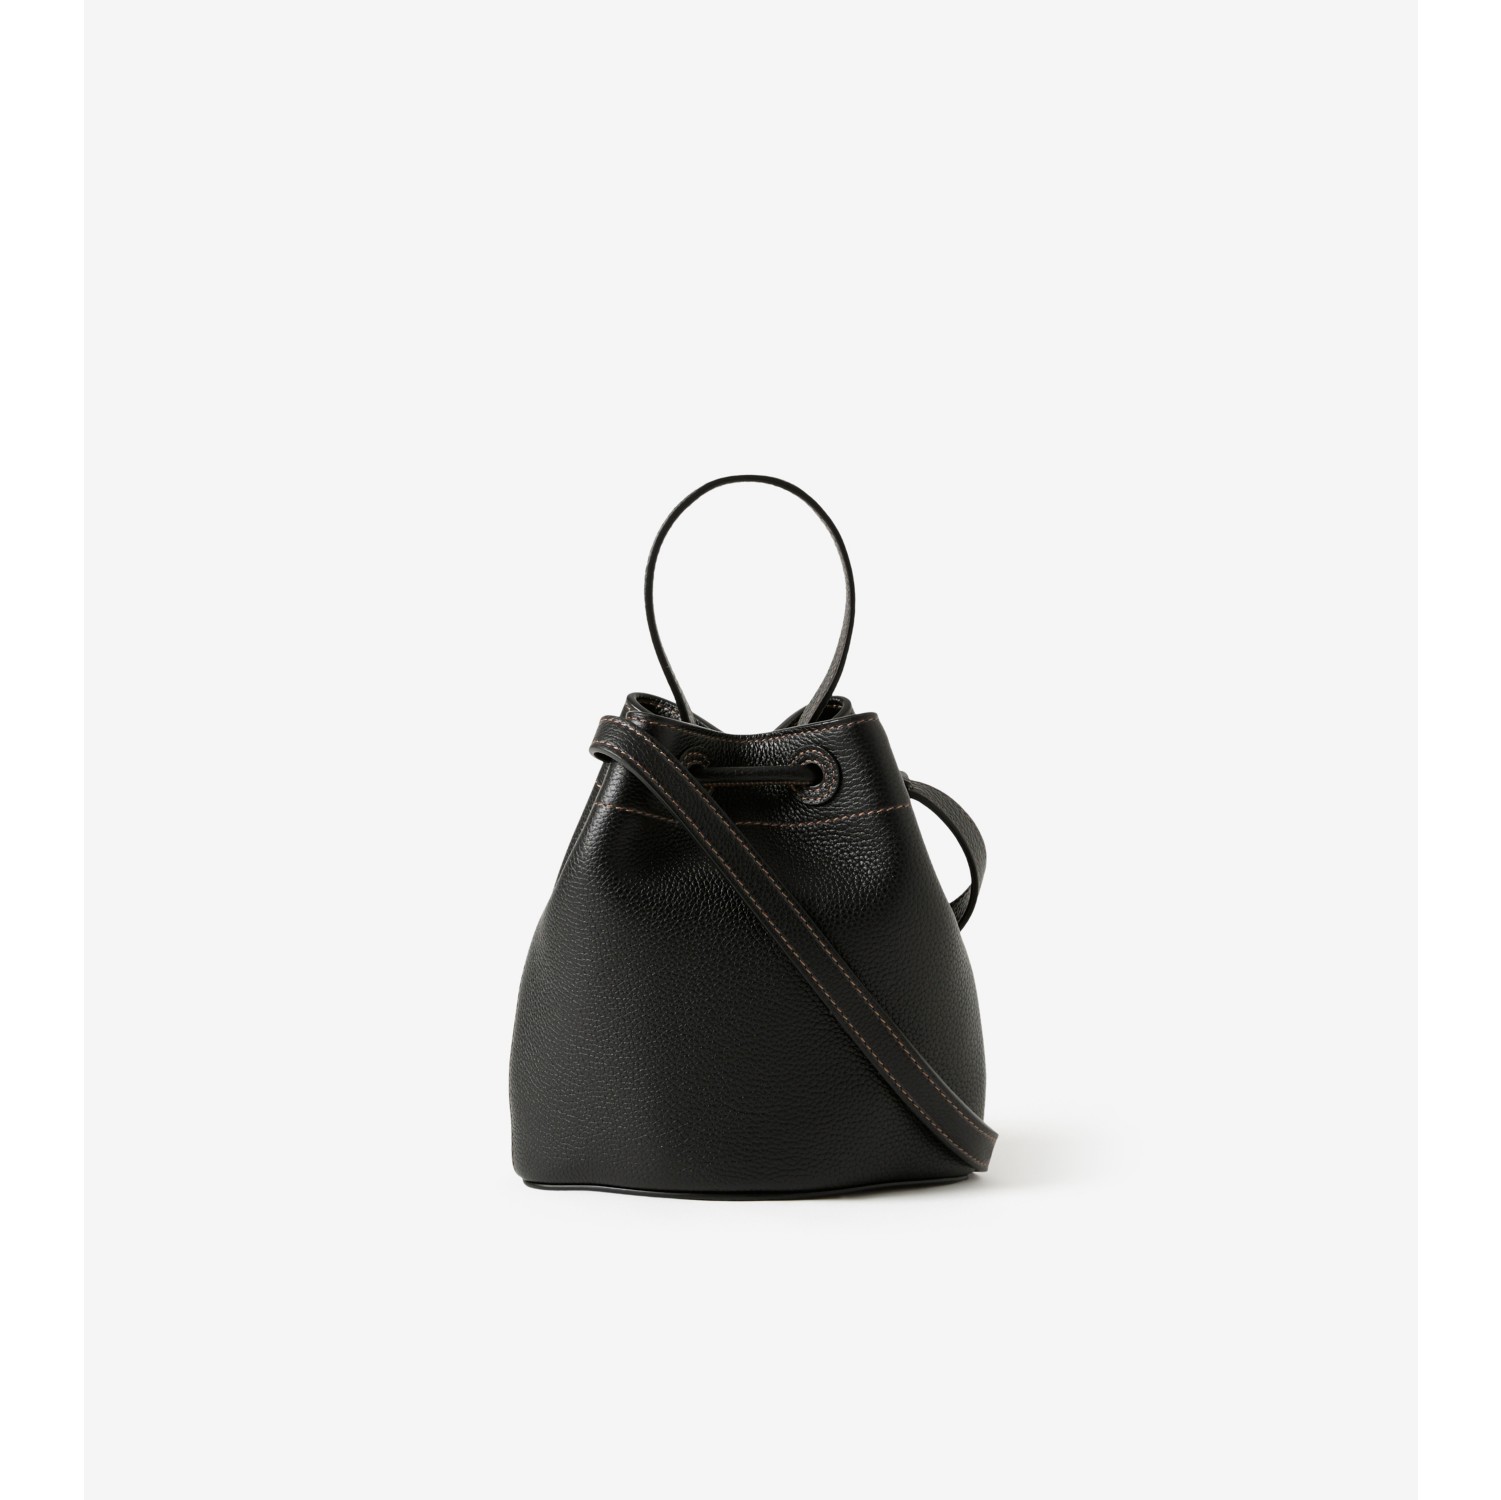 Burberry Grainy Leather Bucket Bag in Black